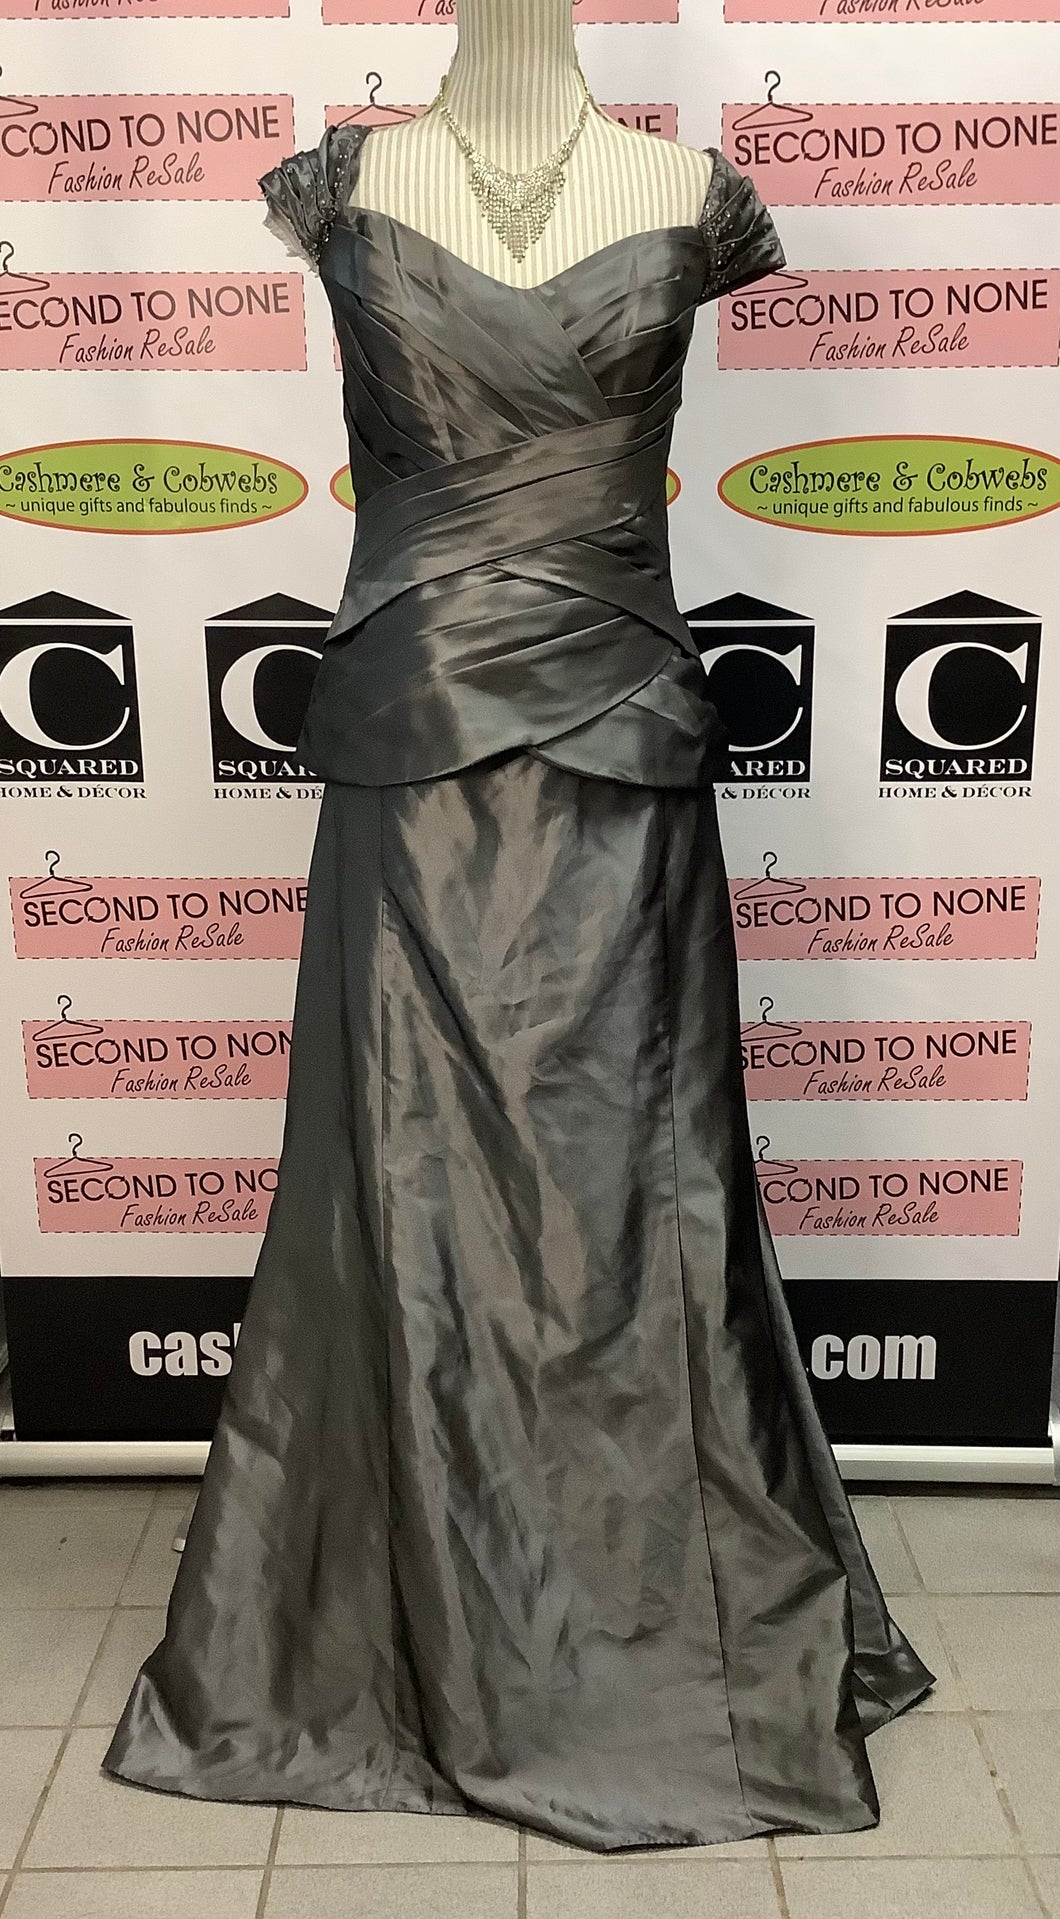 Alfred Angelo Gun Metal 2 PC Gown (Size 14)